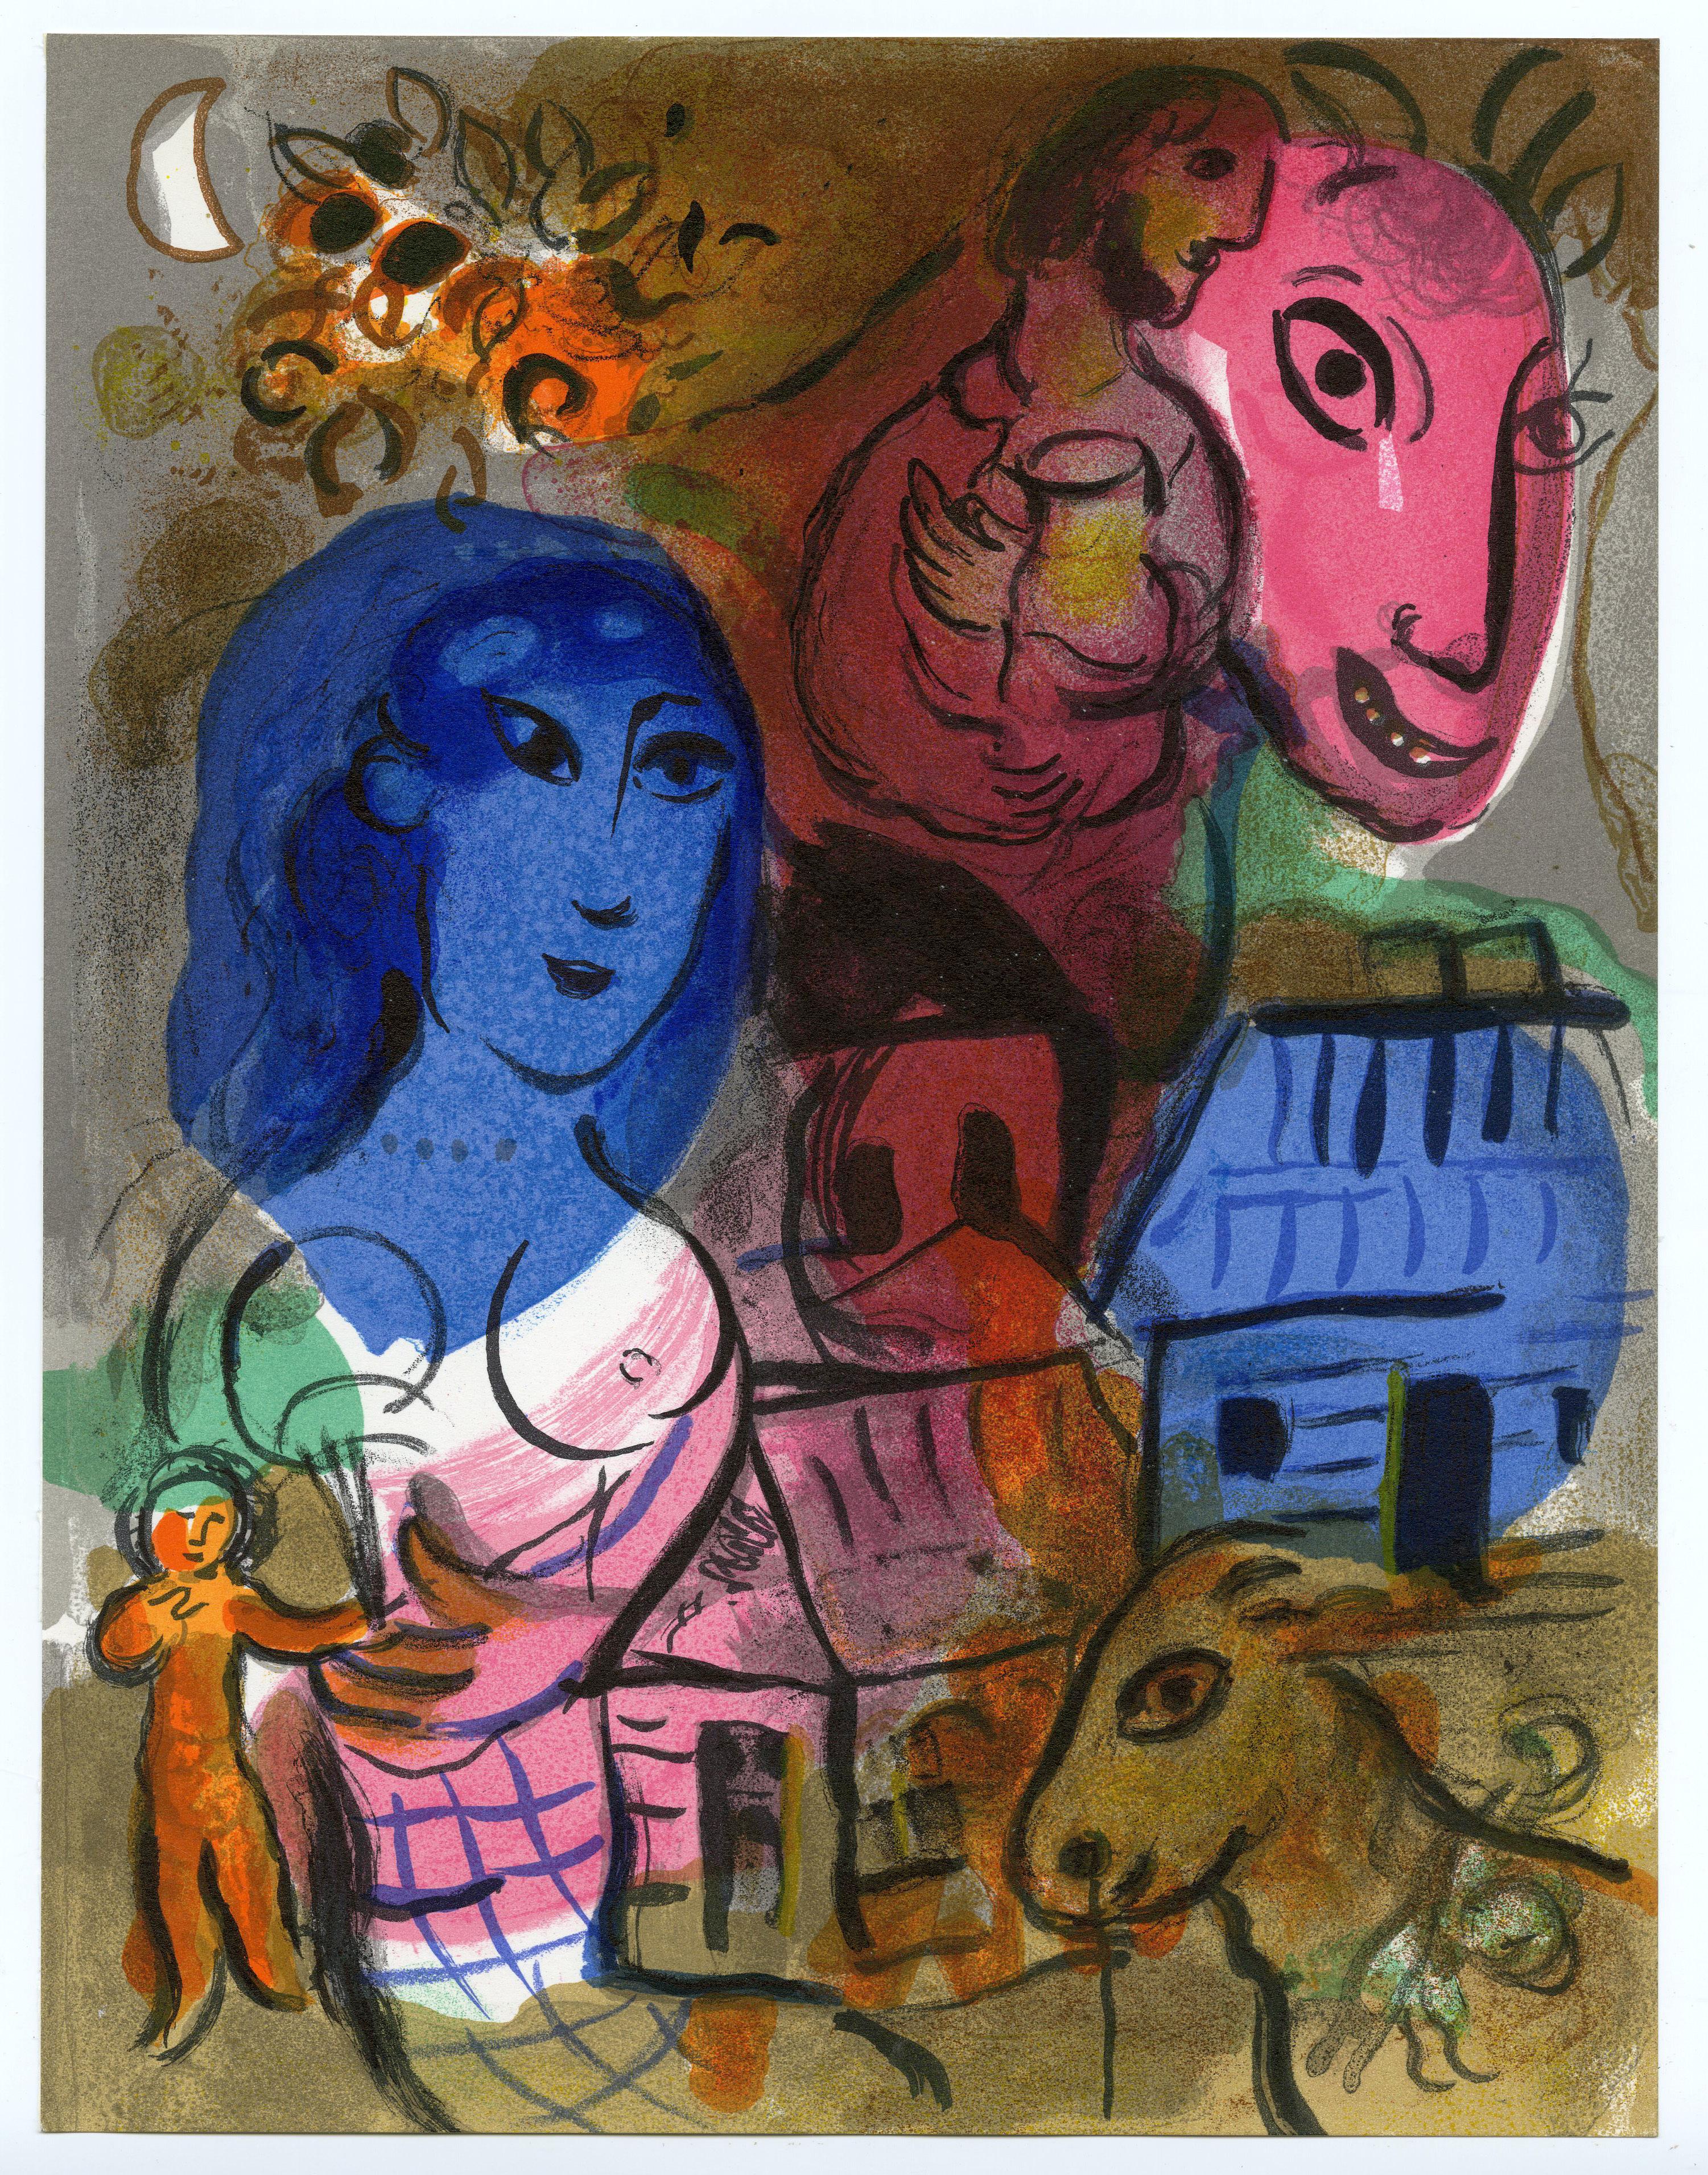 XXe Siecle-Hommage a Marc Chagall
Color lithograph, 1969
Unsigned as issued by XXe Siecle
From: XXe Siecle, Volume, Special Issue Marc Chagall
Published by G. di San Lazzaro for A. Maeght, Paris
Printed by Mourlot, Paris
Edition 12,000
Condition: